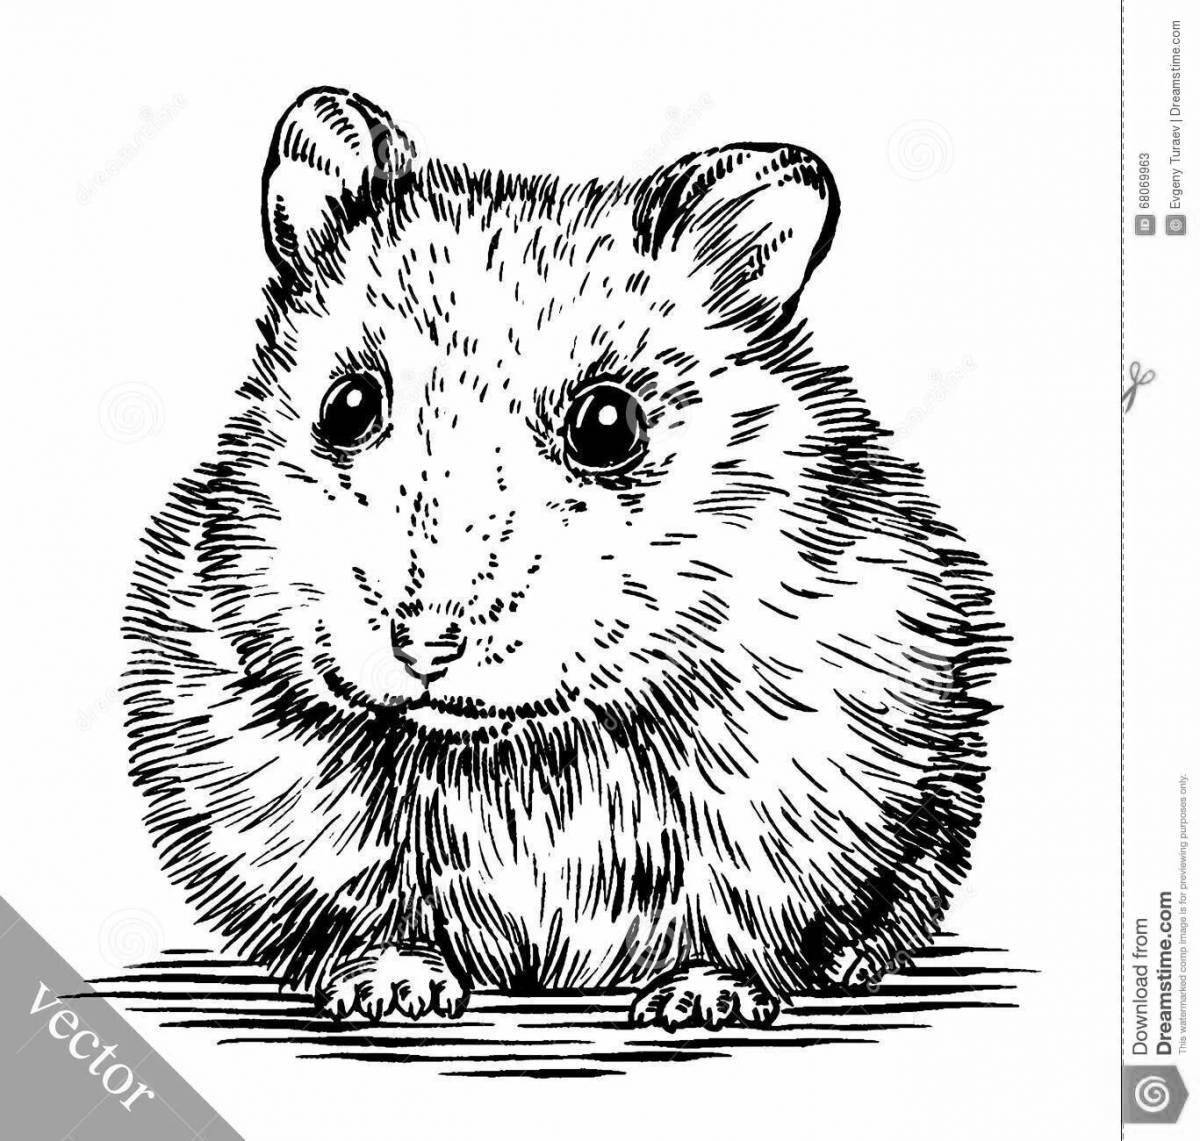 Playful coloring of hamsters